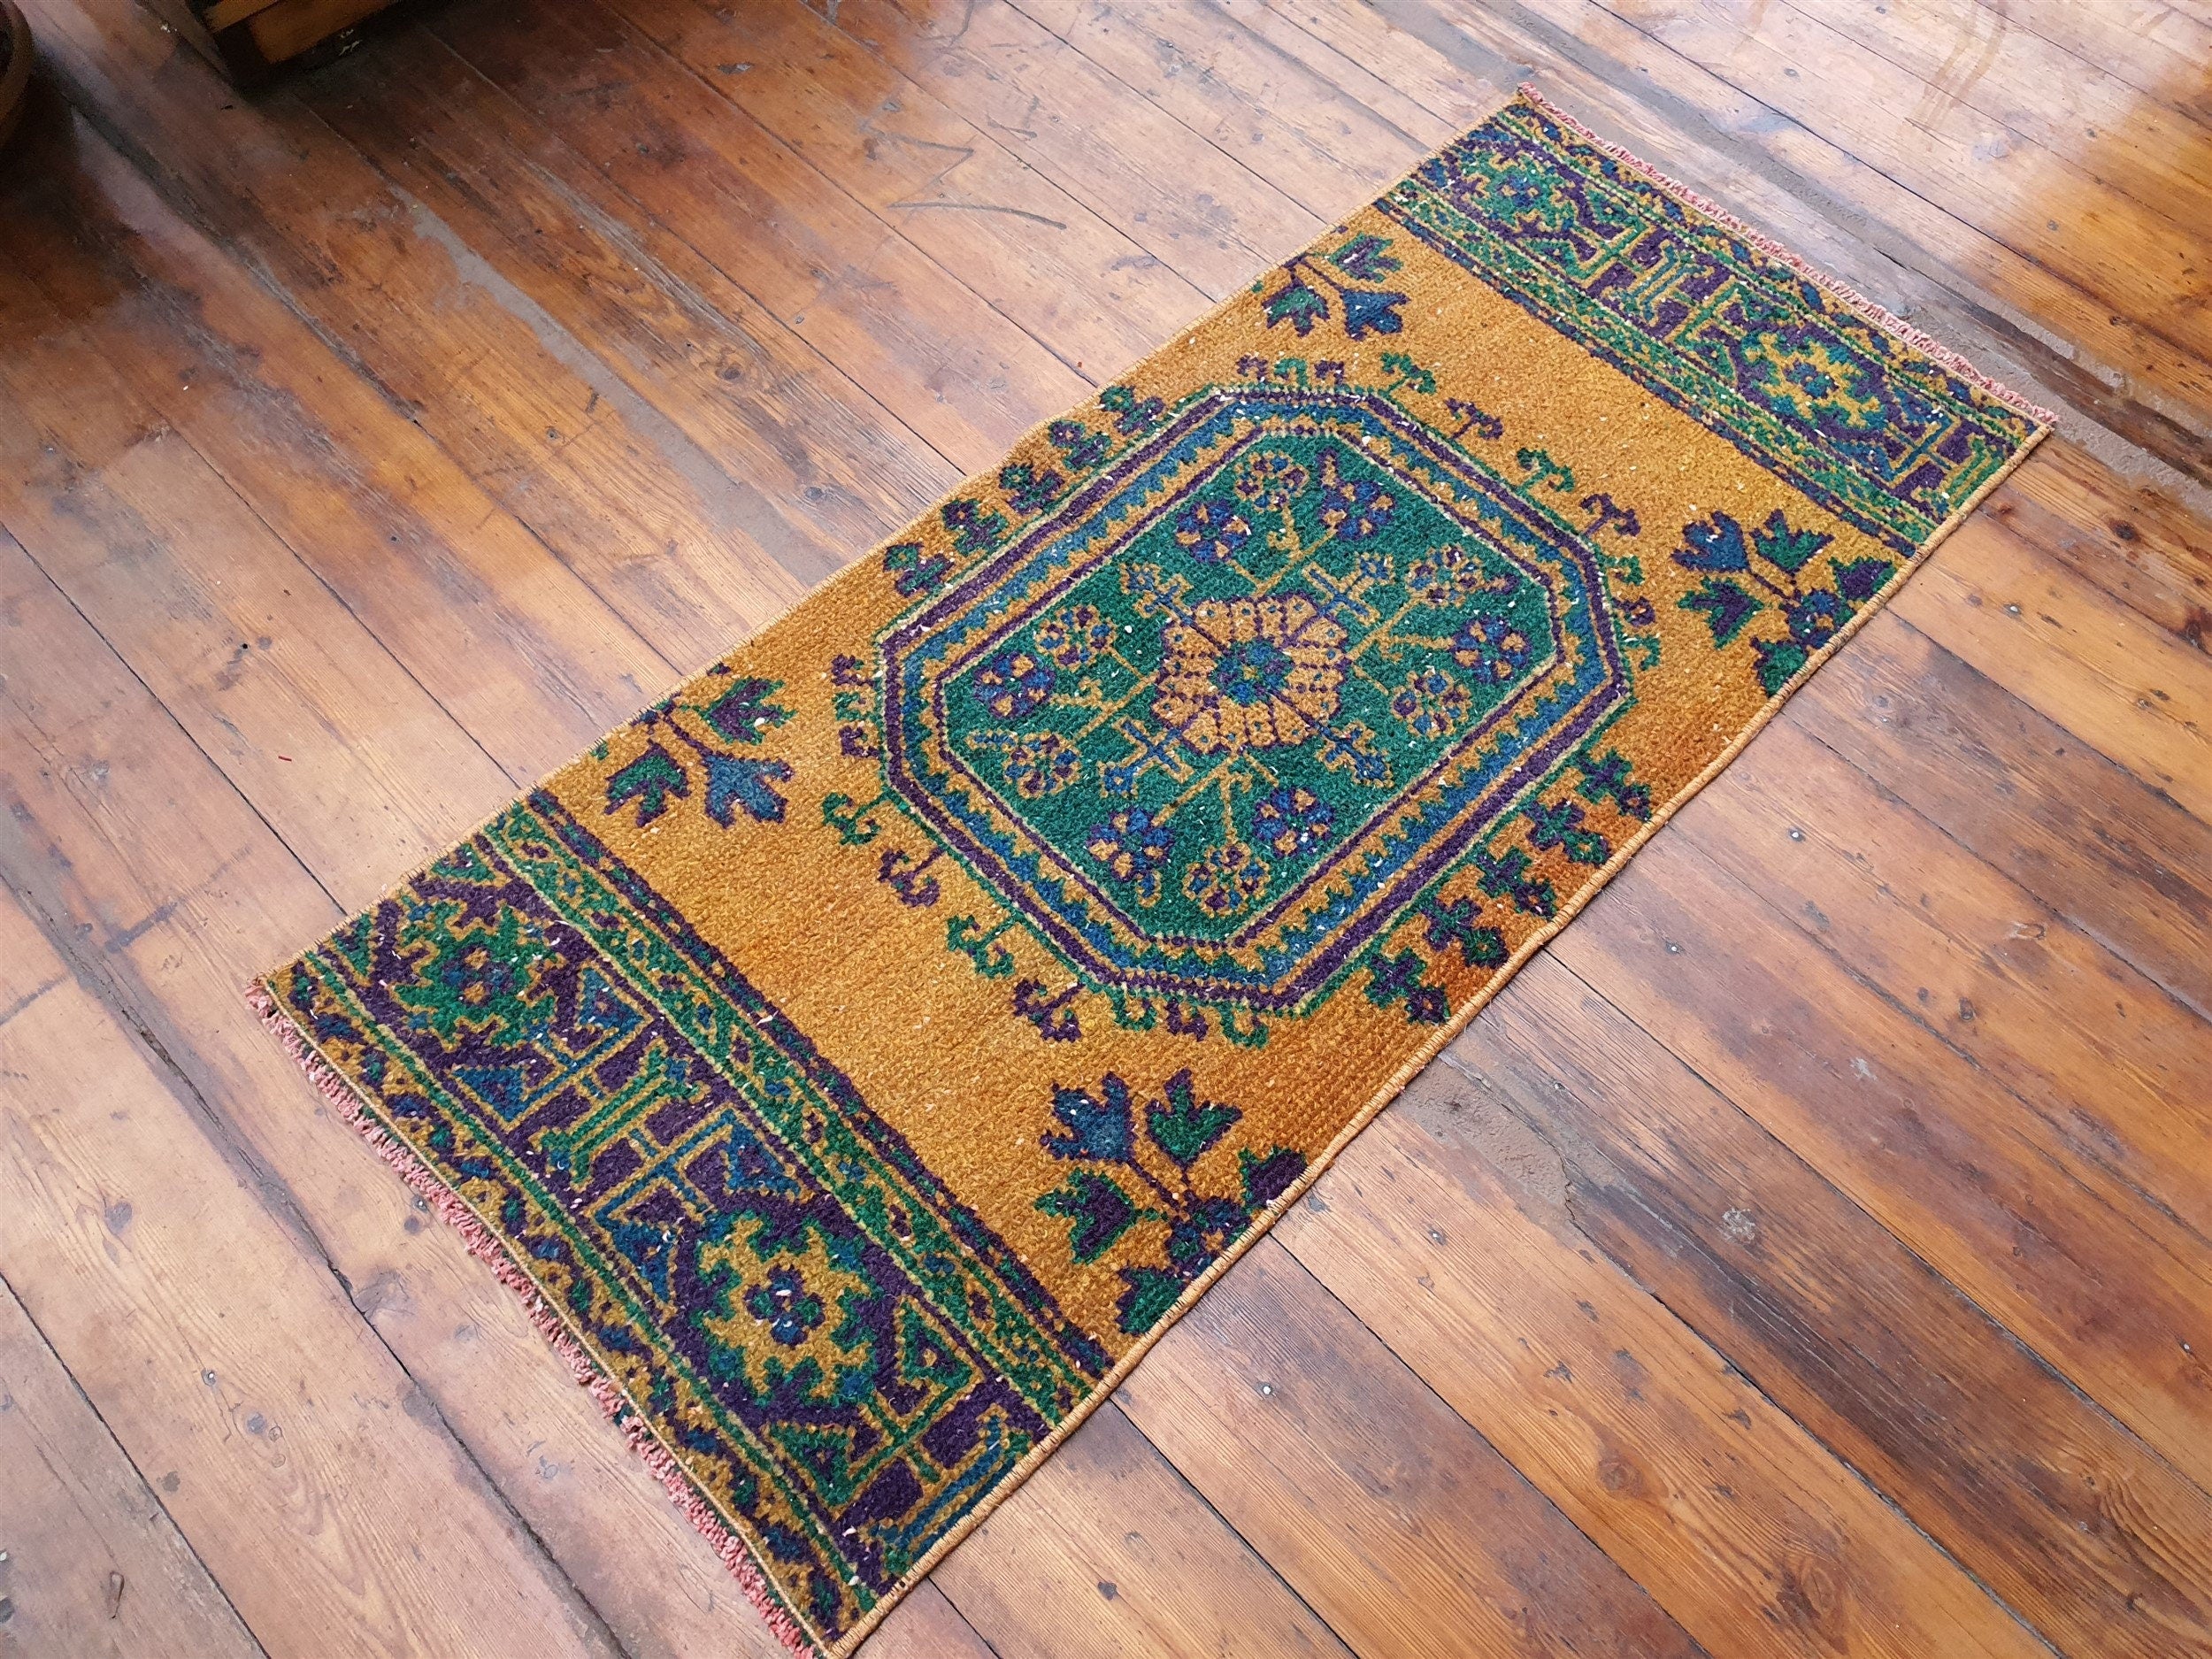 Small Turkish Rug, 4 ft 3 in x 1 ft 9 in, Apricot Orange and Teal Green Vintage Faded Distressed Door Mat